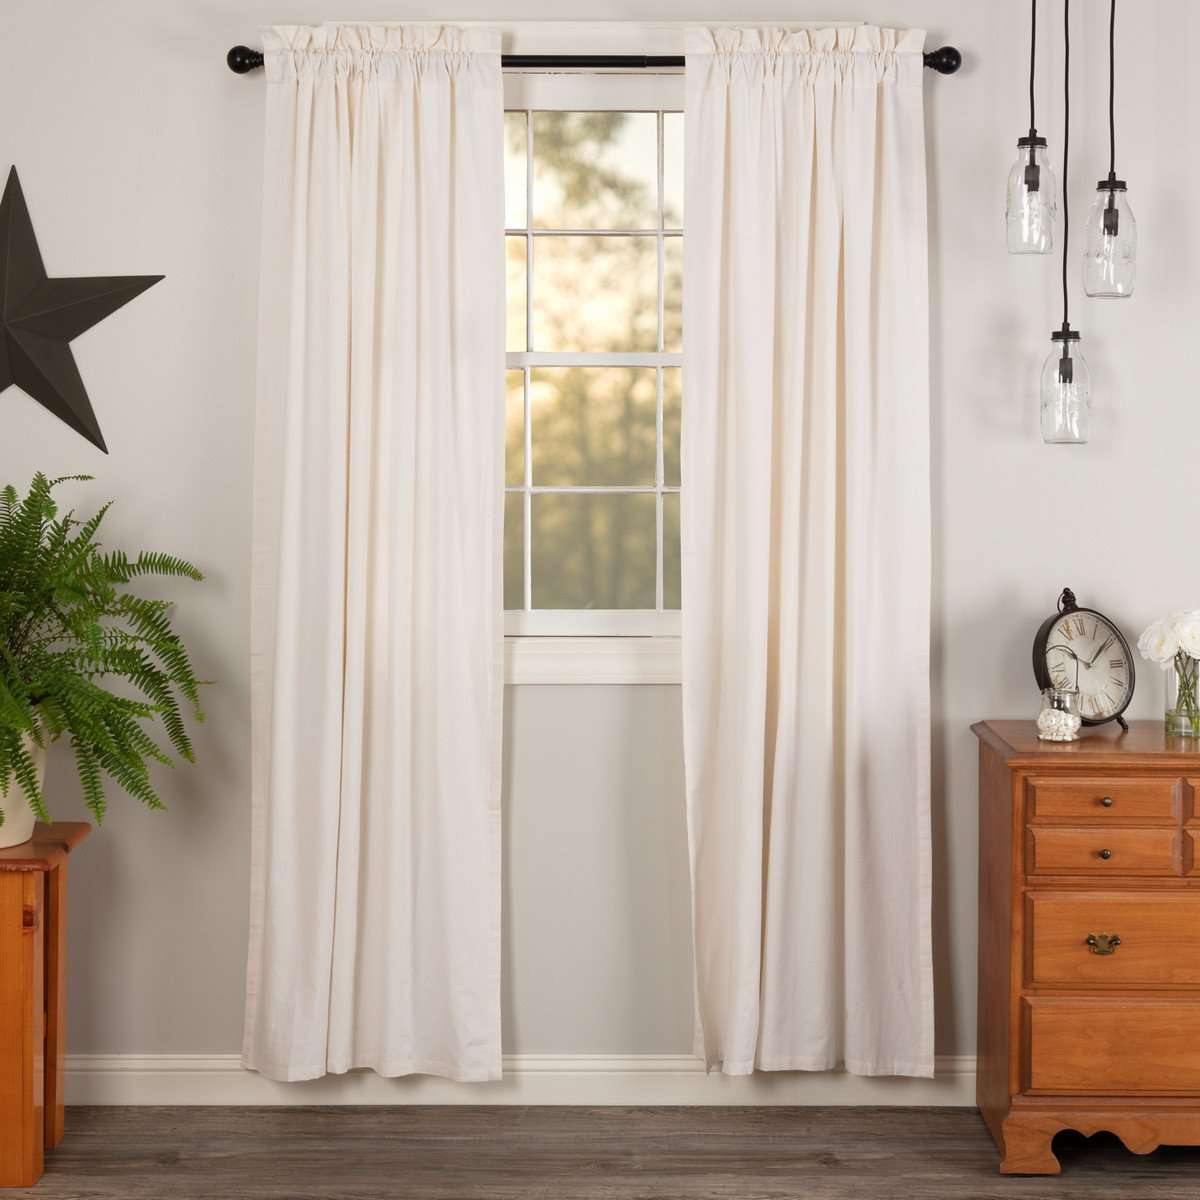 Simple Life Flax Antique White Panel Curtain Set of 2 84x40 VHC Brands - The Fox Decor